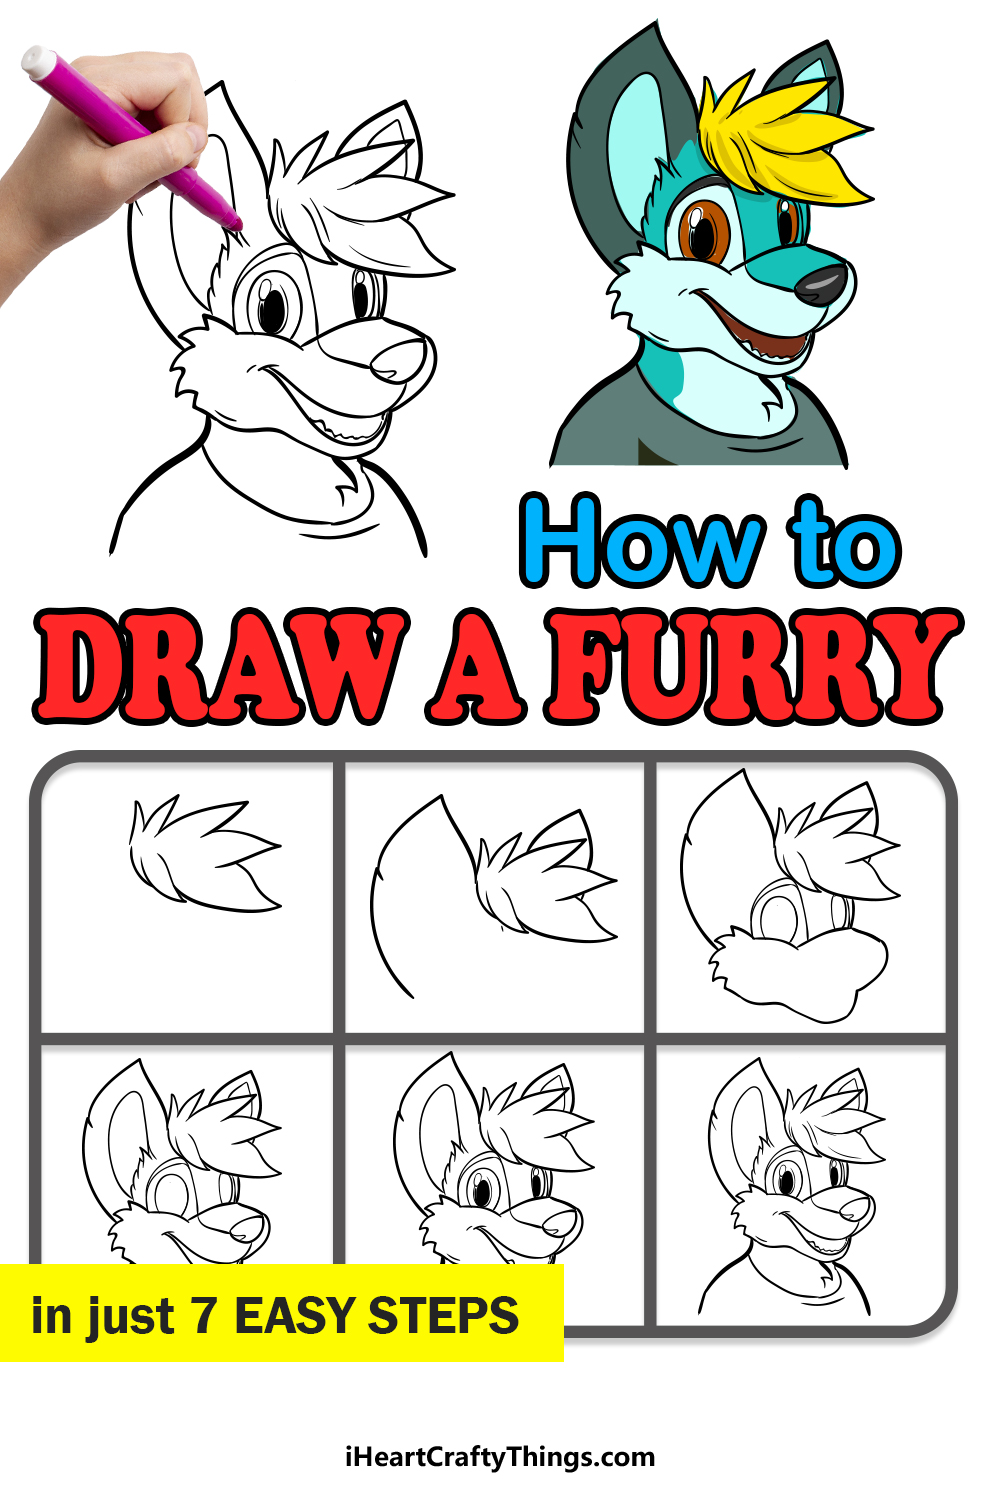 how to draw a furry in 7 easy steps